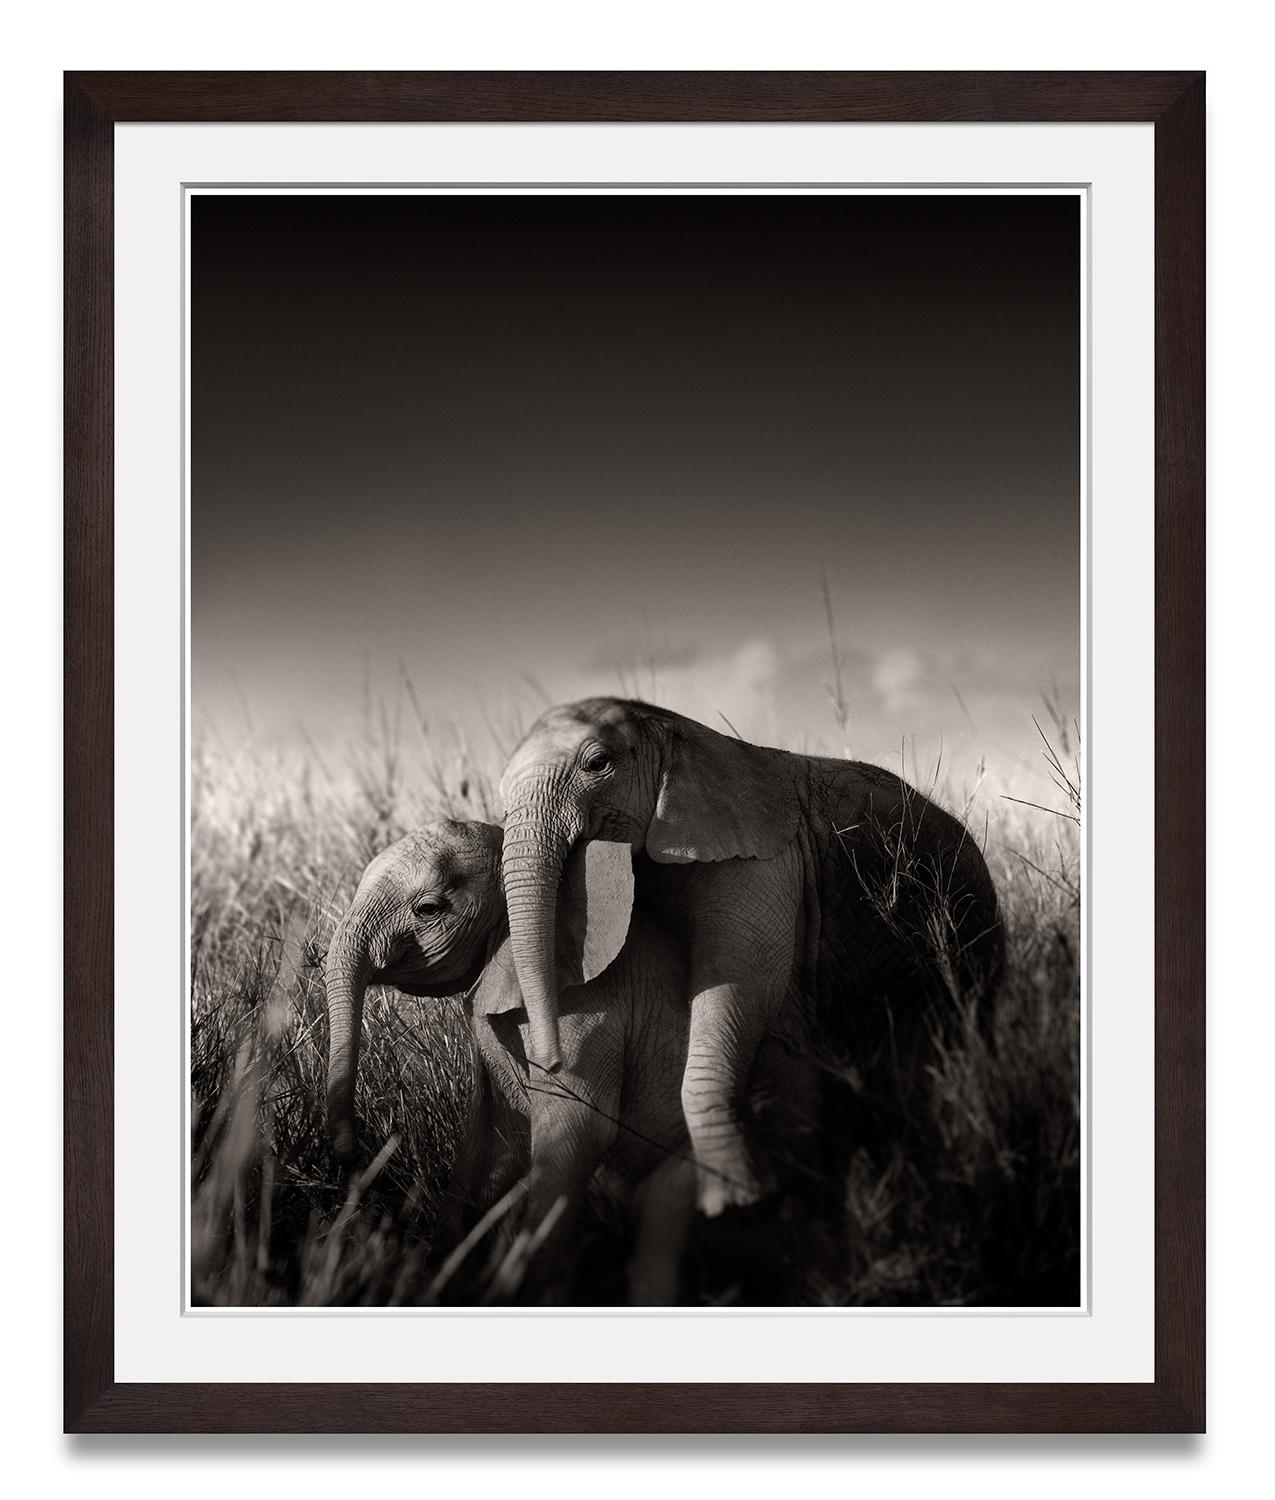 Wild elephant babies playing IV, animal, wildlife, black and white photography - Photograph by Joachim Schmeisser